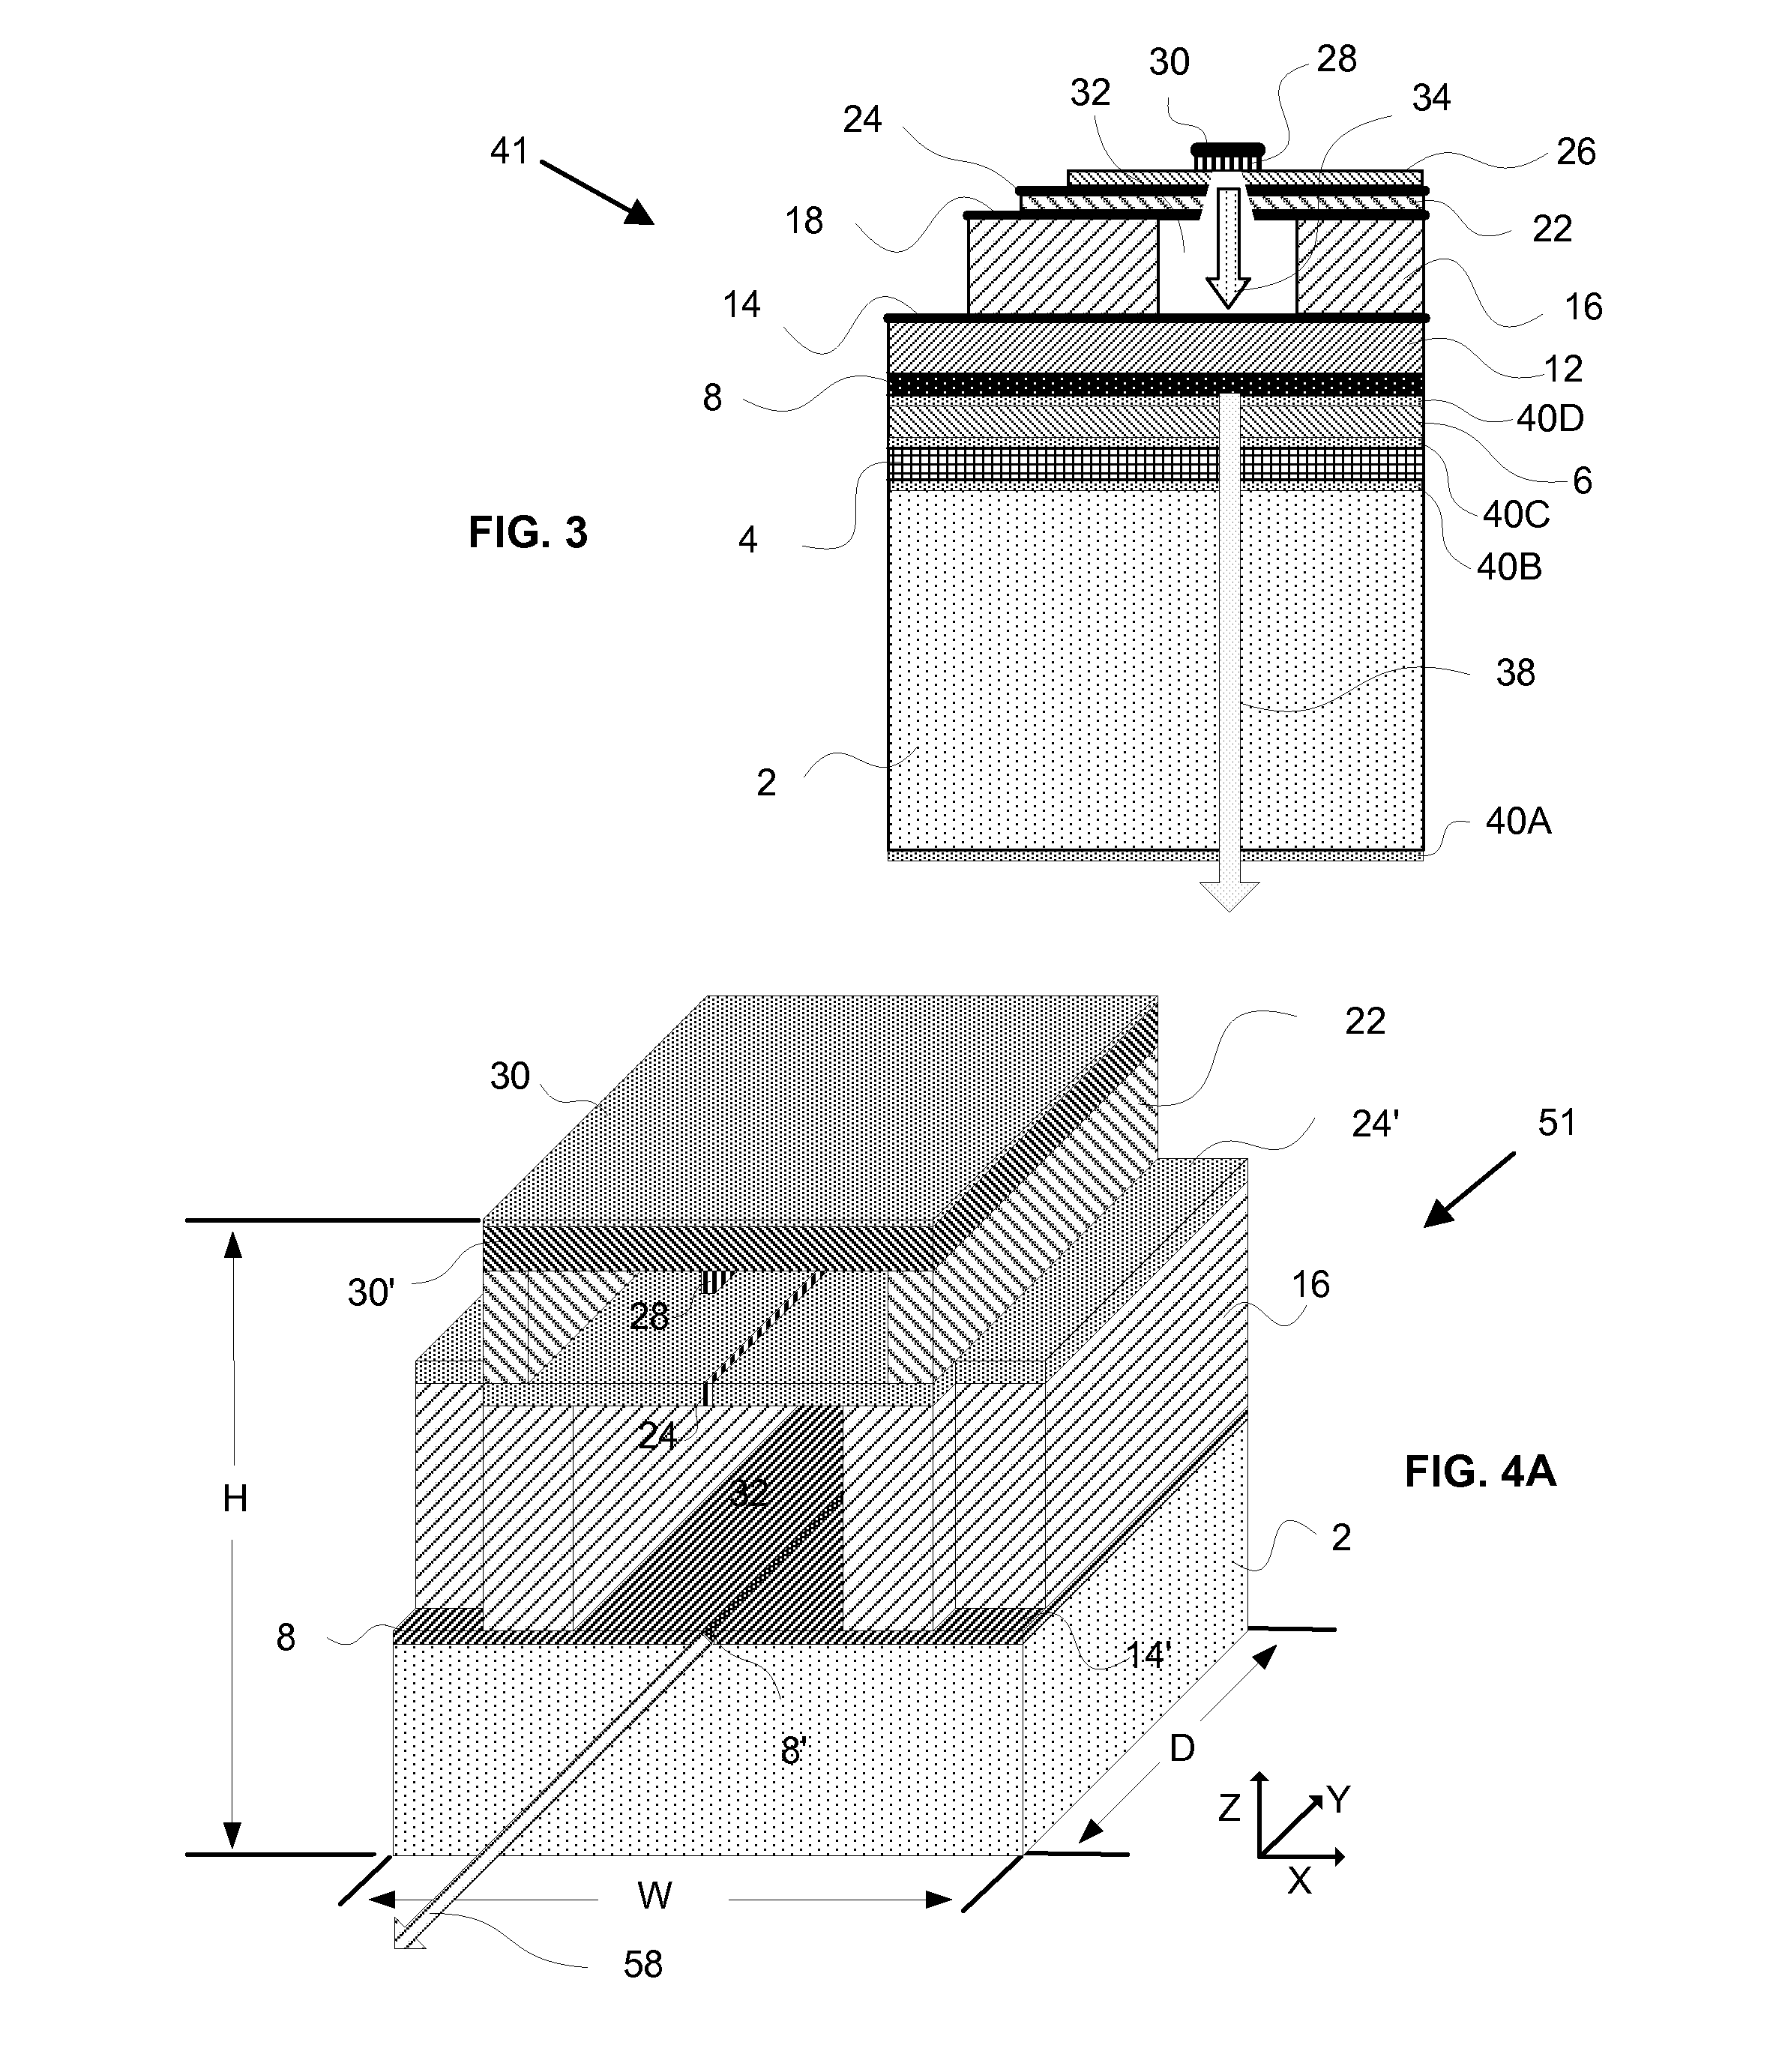 Spectroscopic chemical analysis methods and apparatus